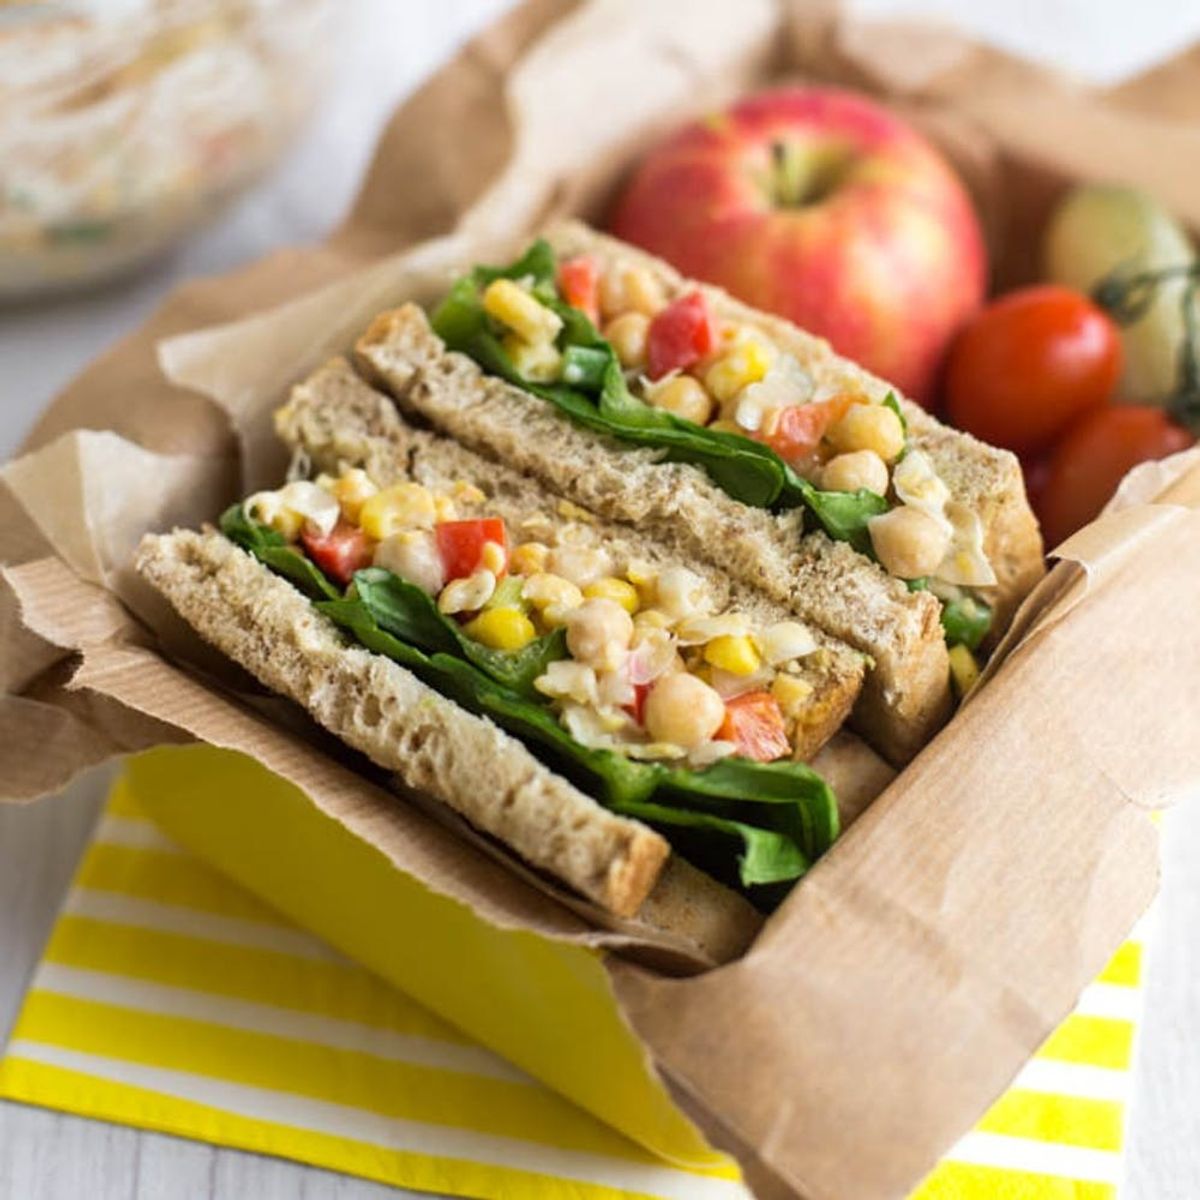 Make Lunch Exciting With Make-Ahead Chickpea Salad Sandwiches